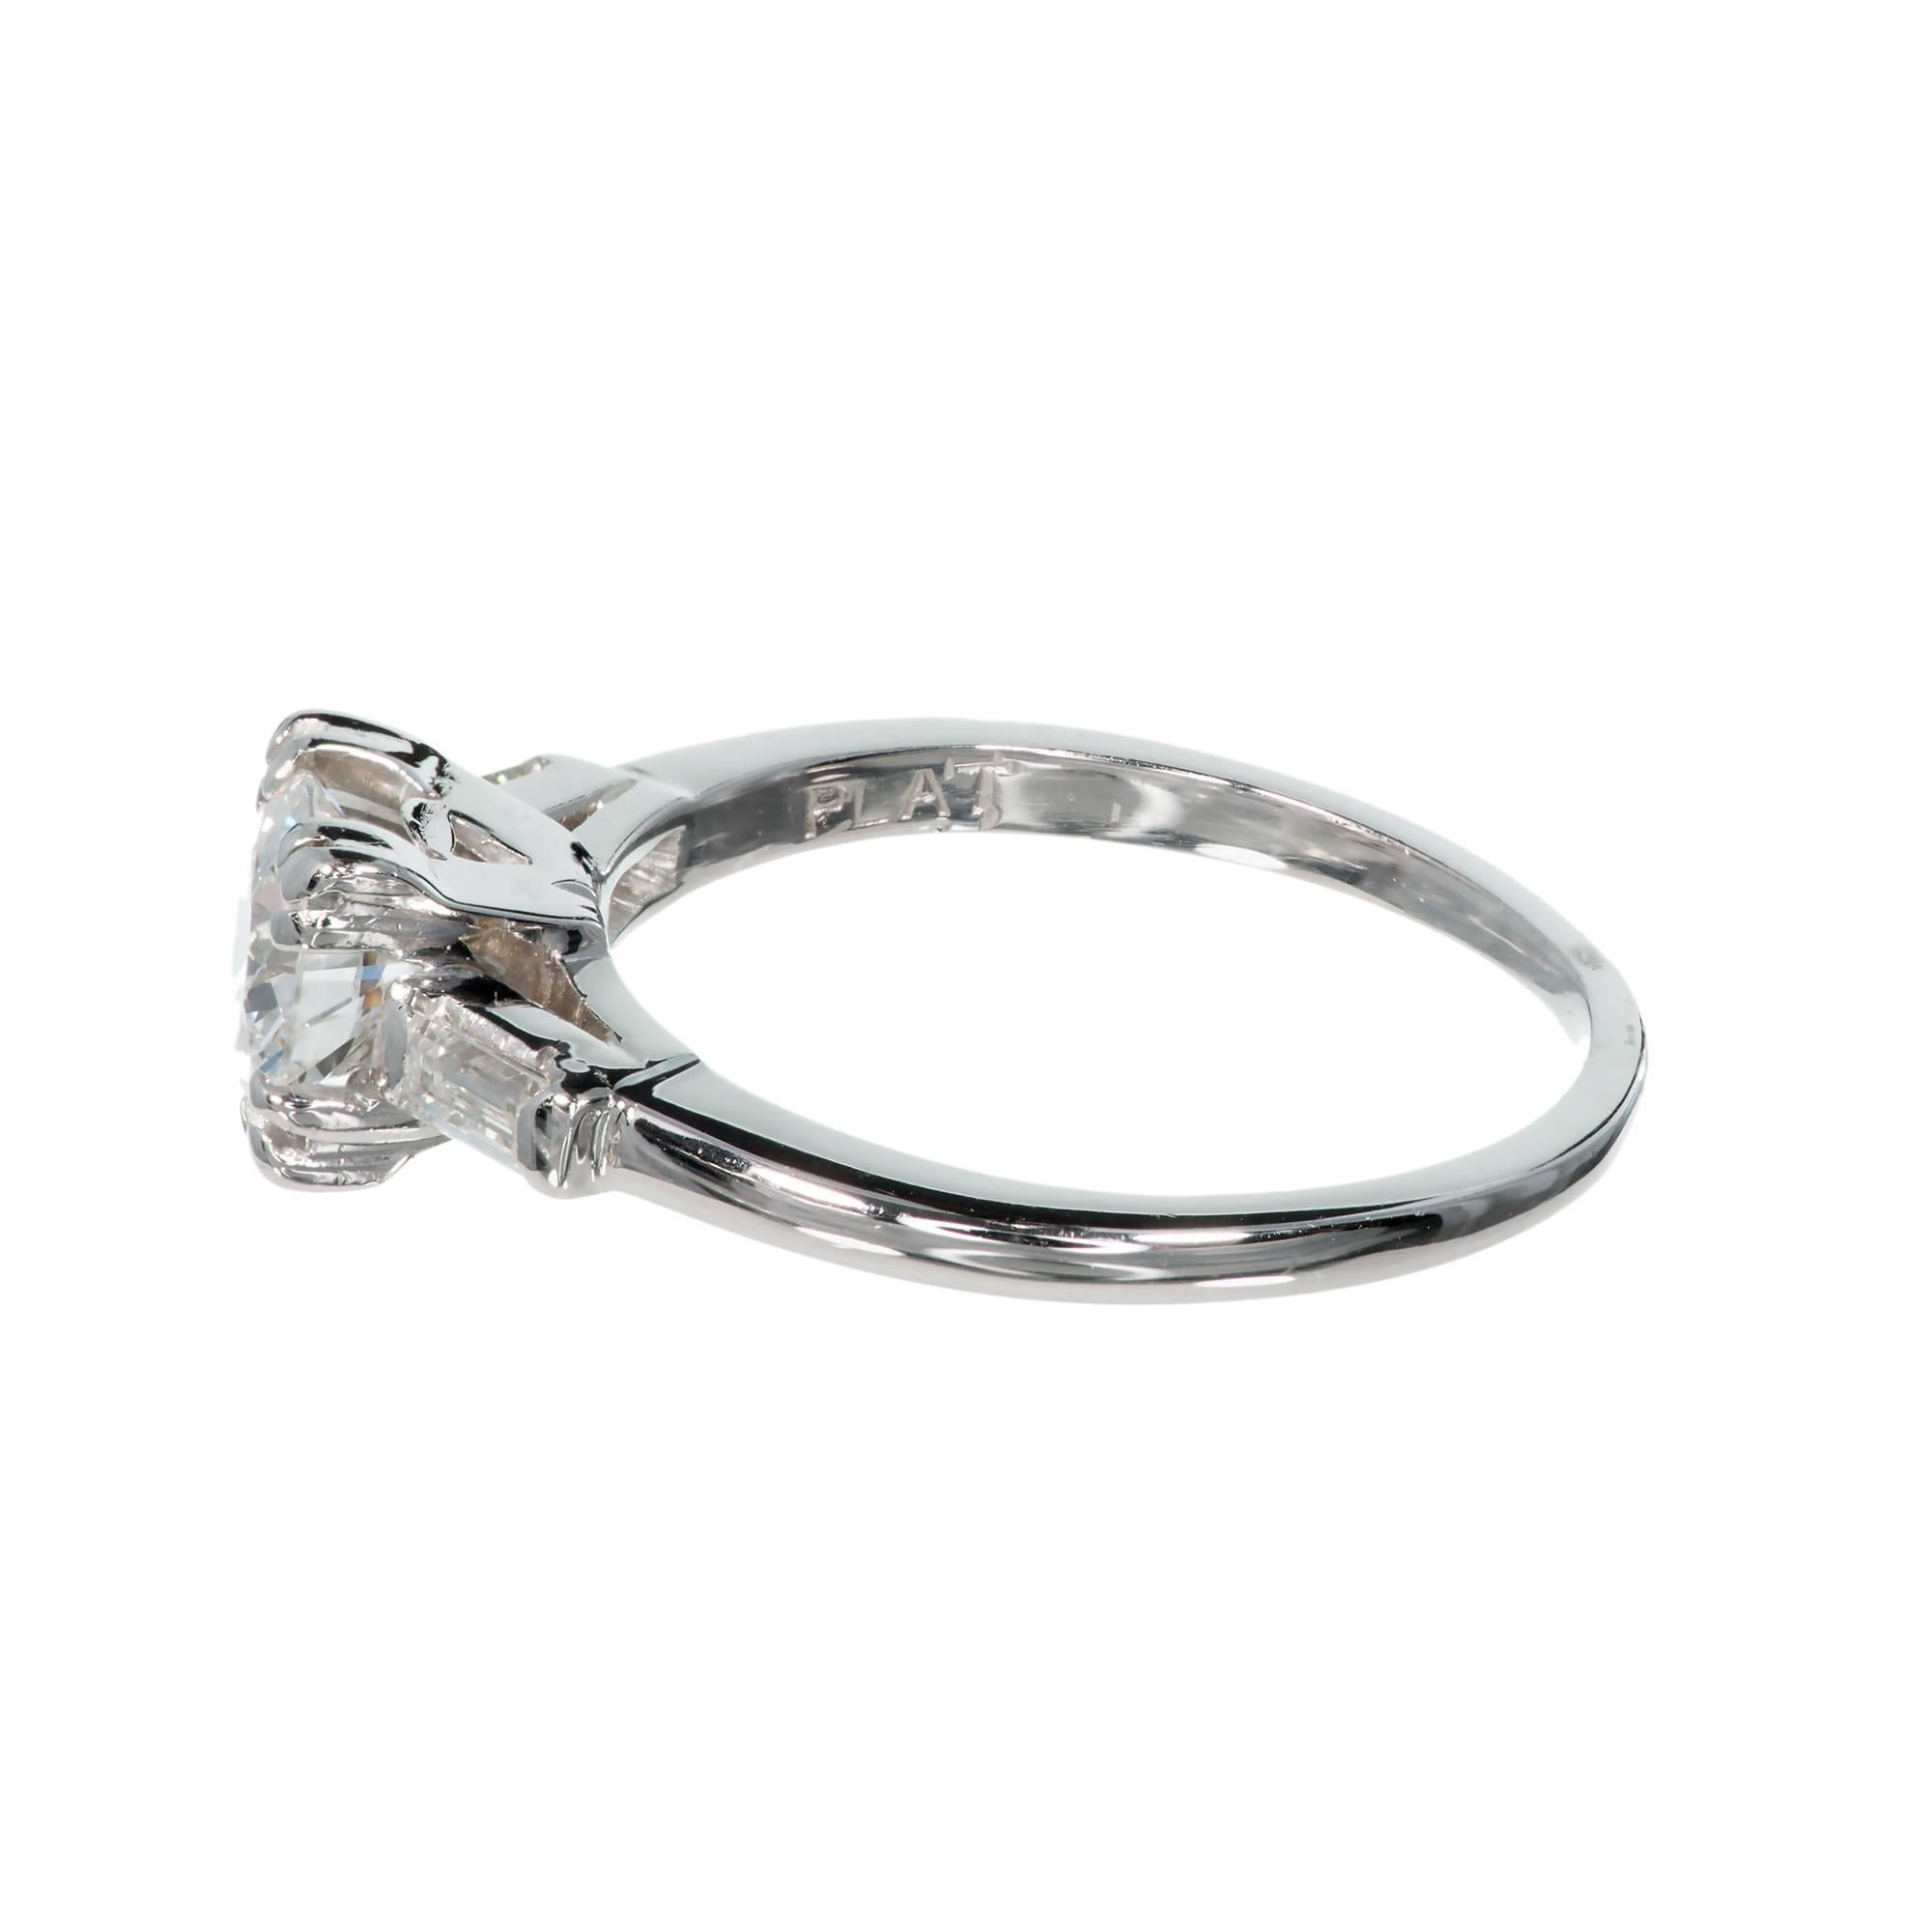 Art Deco Diamond solid Platinum engagement ring. The top is set with three prongs in each corner makes the round diamond look square. EGL certified. 

1 transitional brilliant cut diamond, approx. total weight .74cts, F to G, VS1, 5.90 x 5.88 x